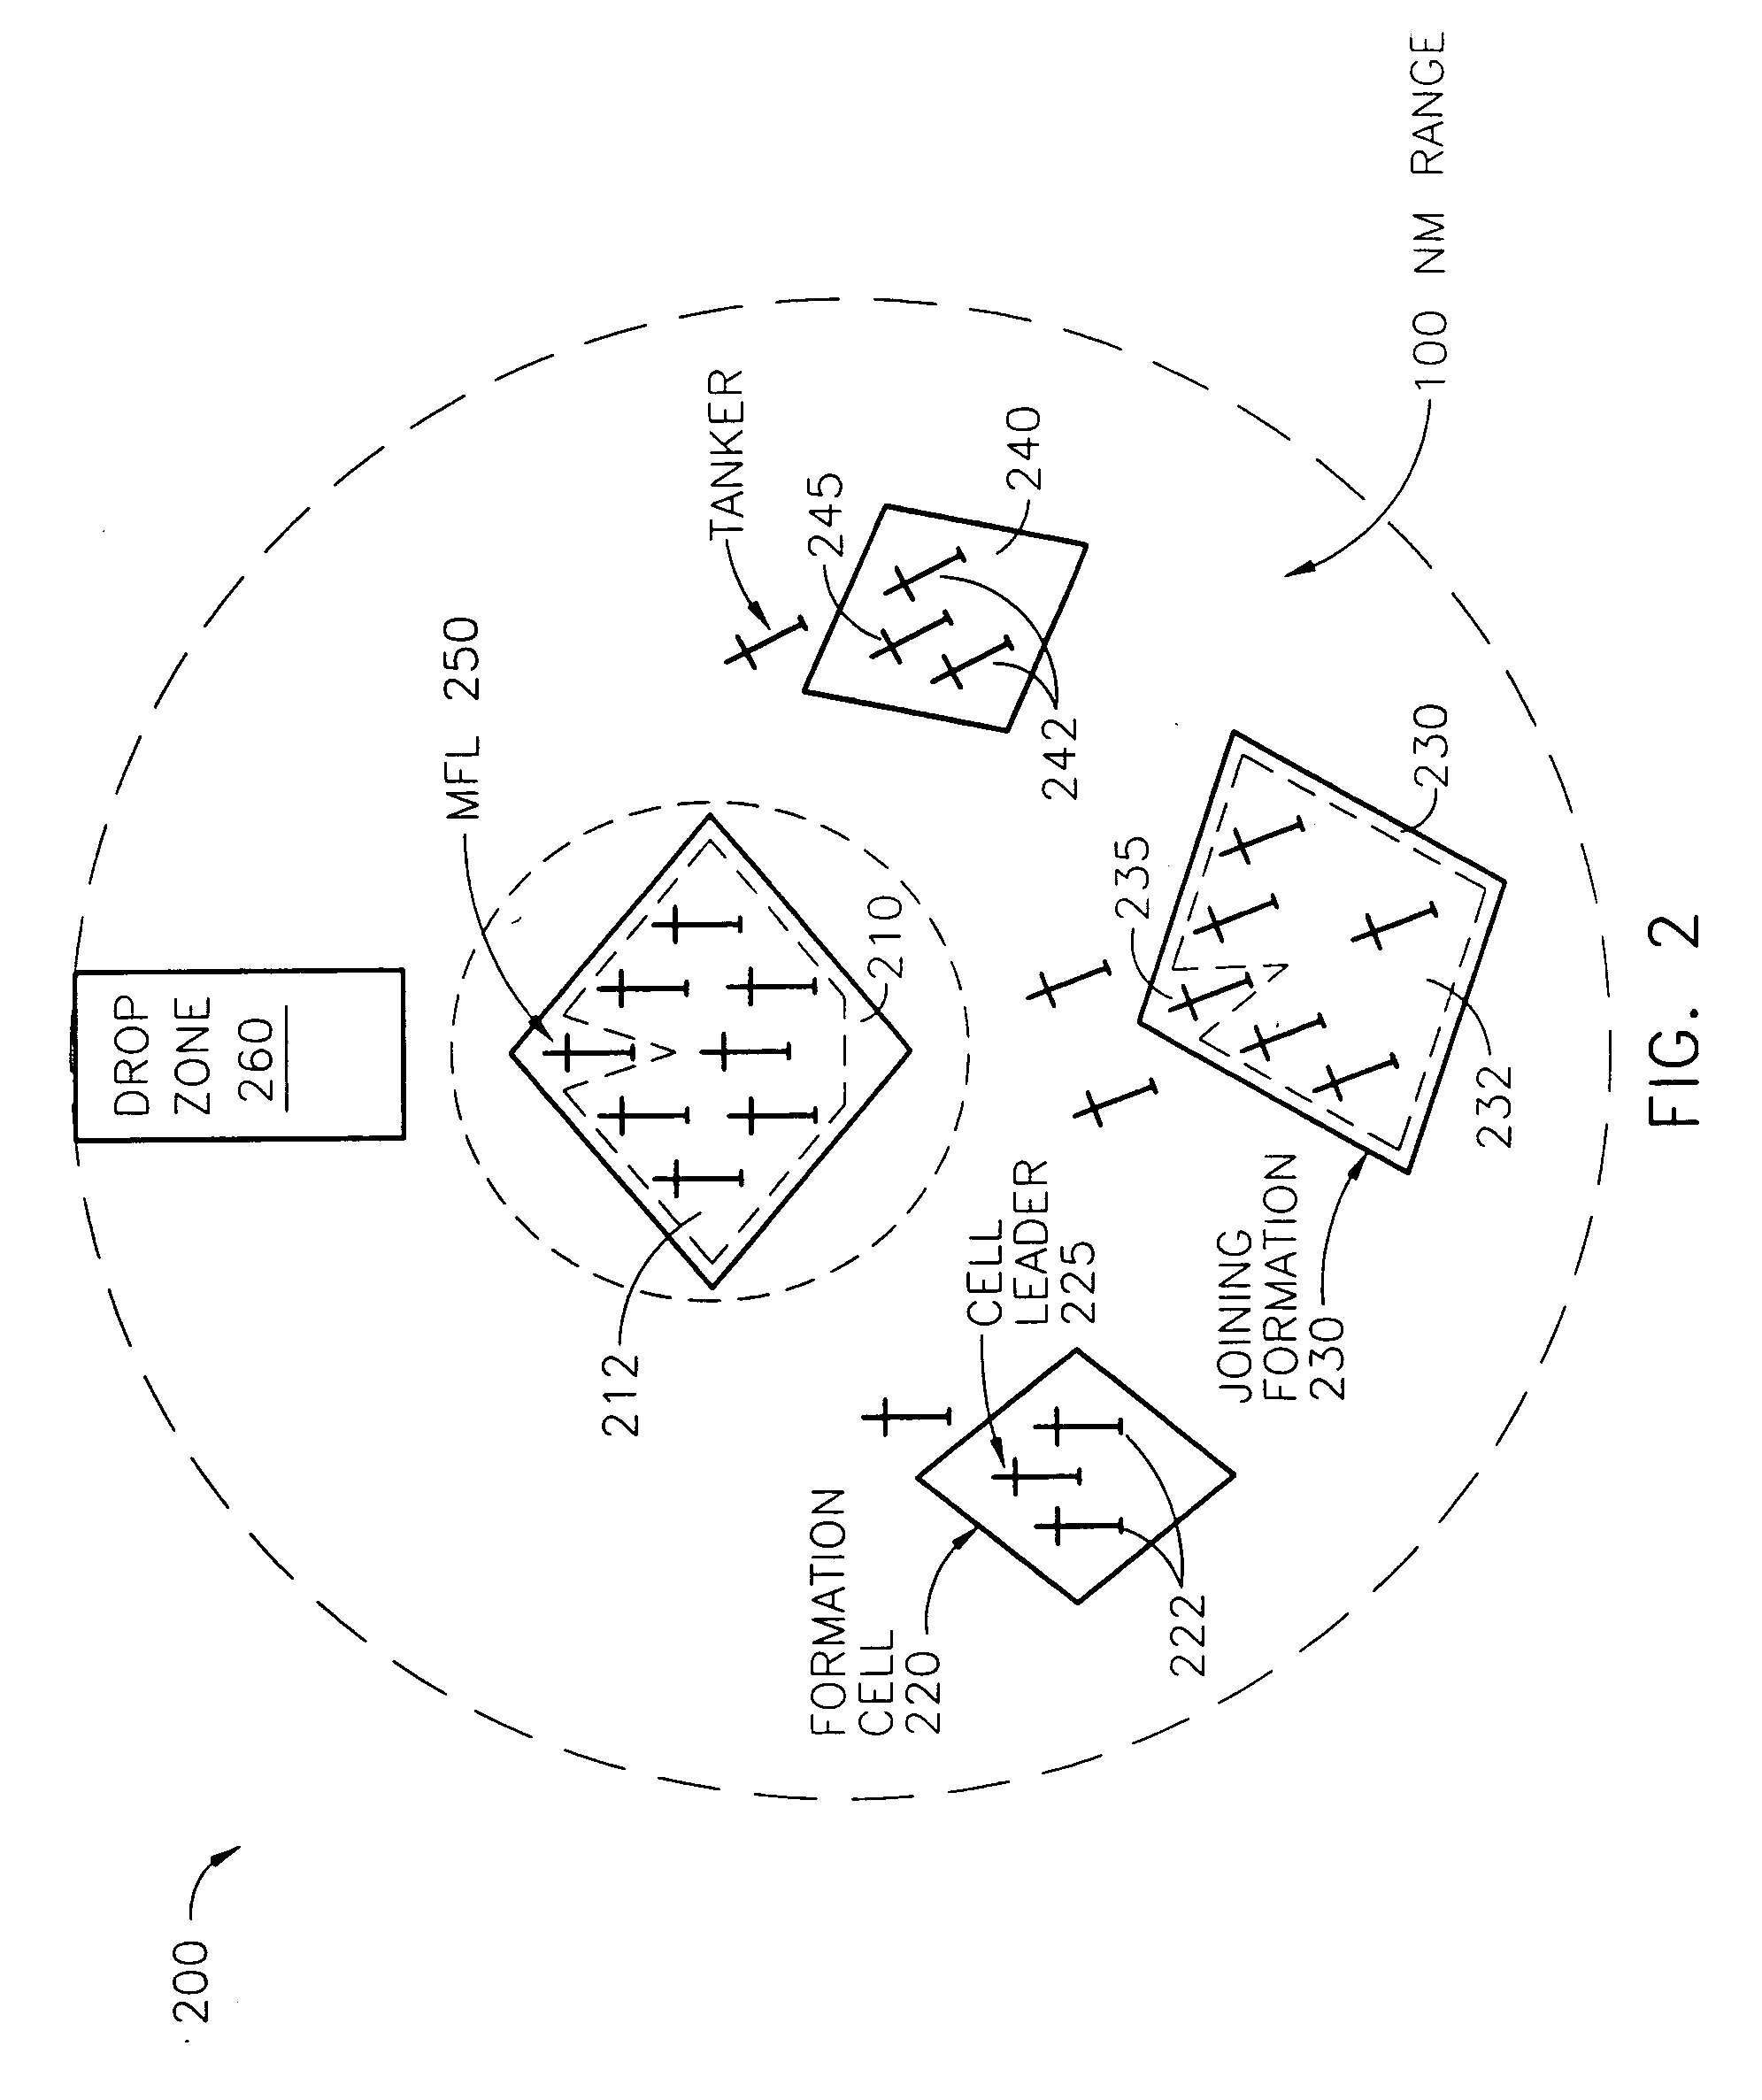 Close/intra-formation positioning collision avoidance system and method